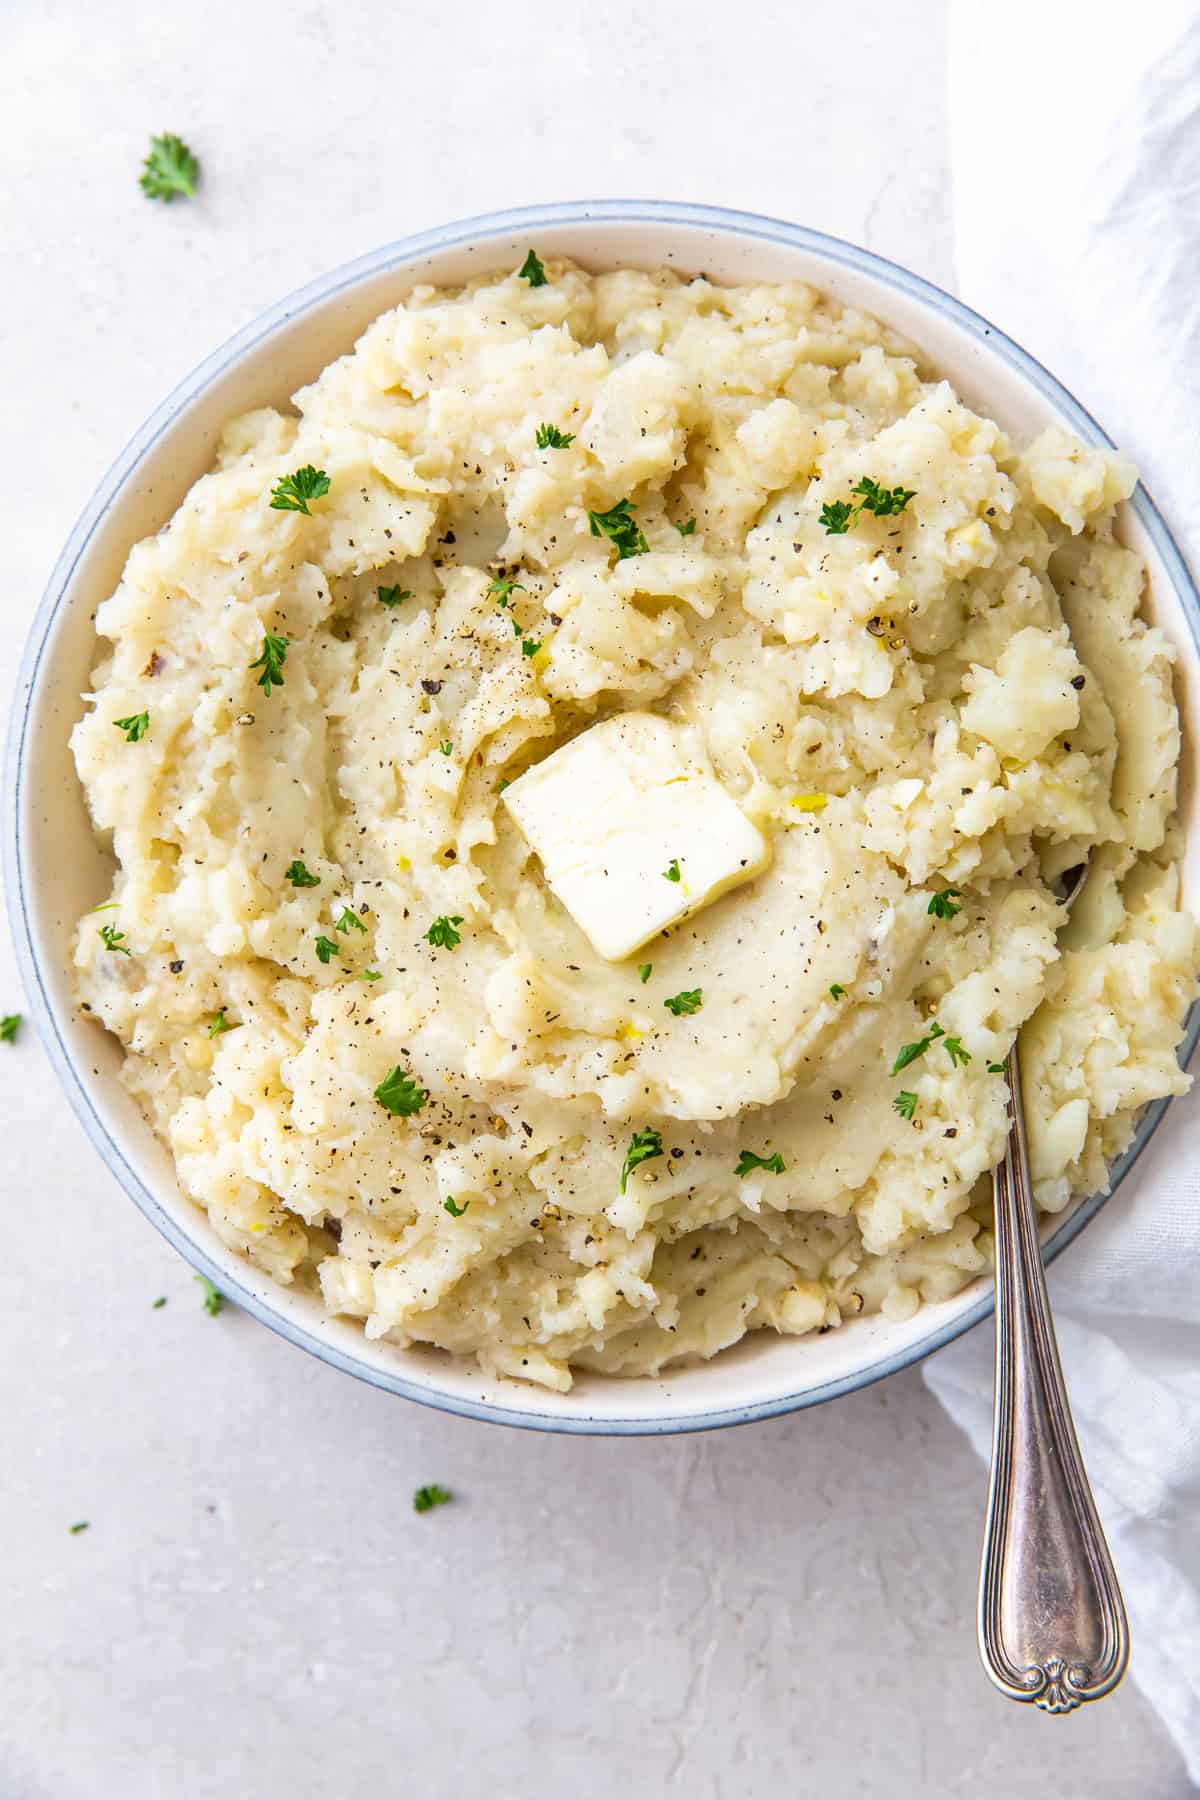 A spoon resting in a bowl of mashed potatoes topped with a pat of butter.